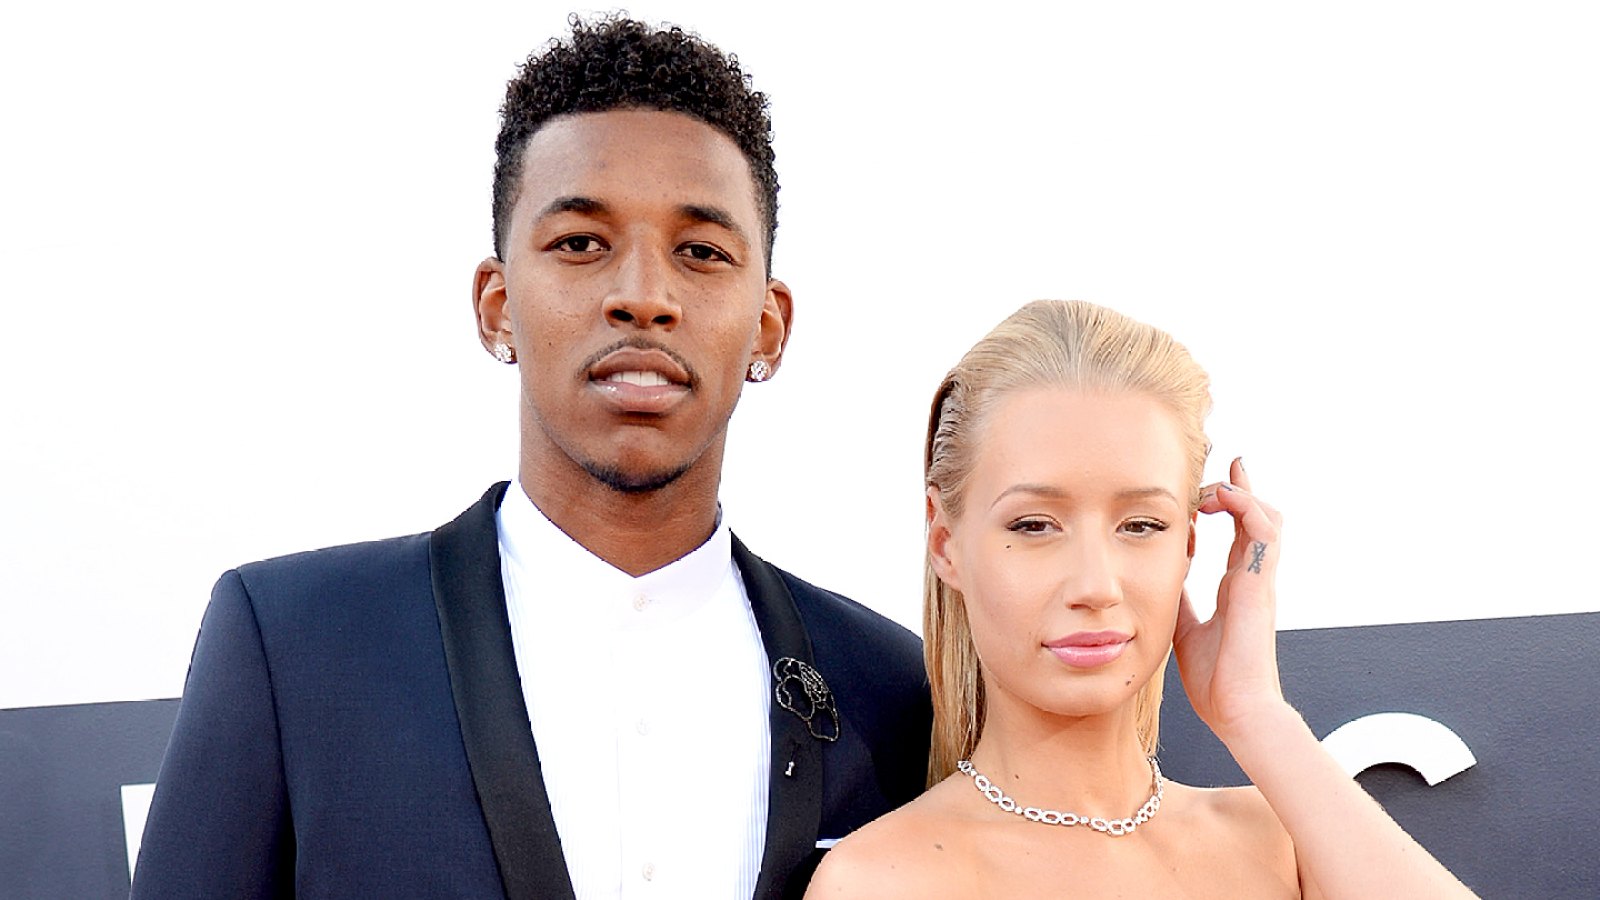 Nick Young and Iggy Azalea attends the 2014 MTV Video Music Awards.